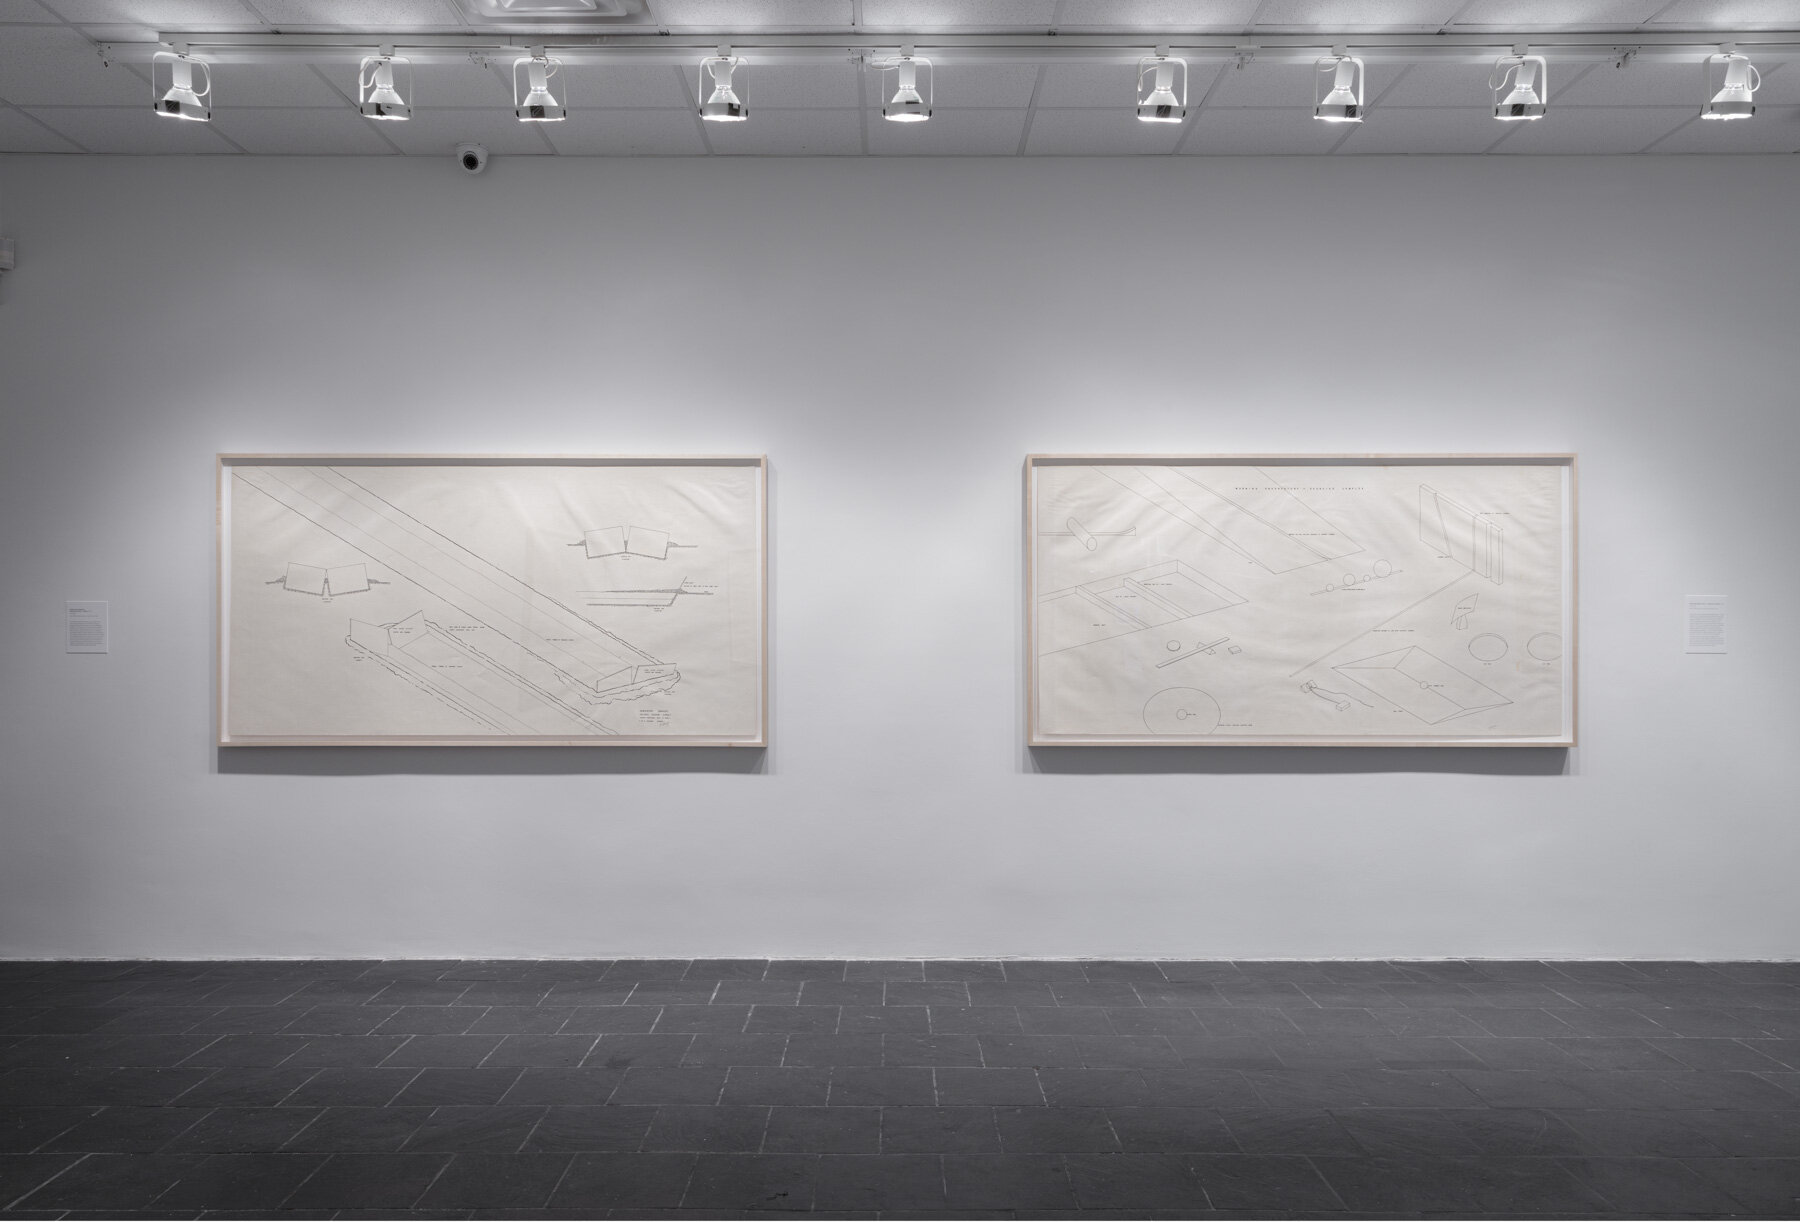  Installation view:  Robert Morris: Para-architectural projects , Hunter College Art Galleries, 2019.LEFT: Observatory Markers, Equinox Sunrise–Sunset , 1971. Ink on paper, 42 x 82 ½ in. (107 x 210 cm). Estate of Robert Morris, courtesy Castelli Gall